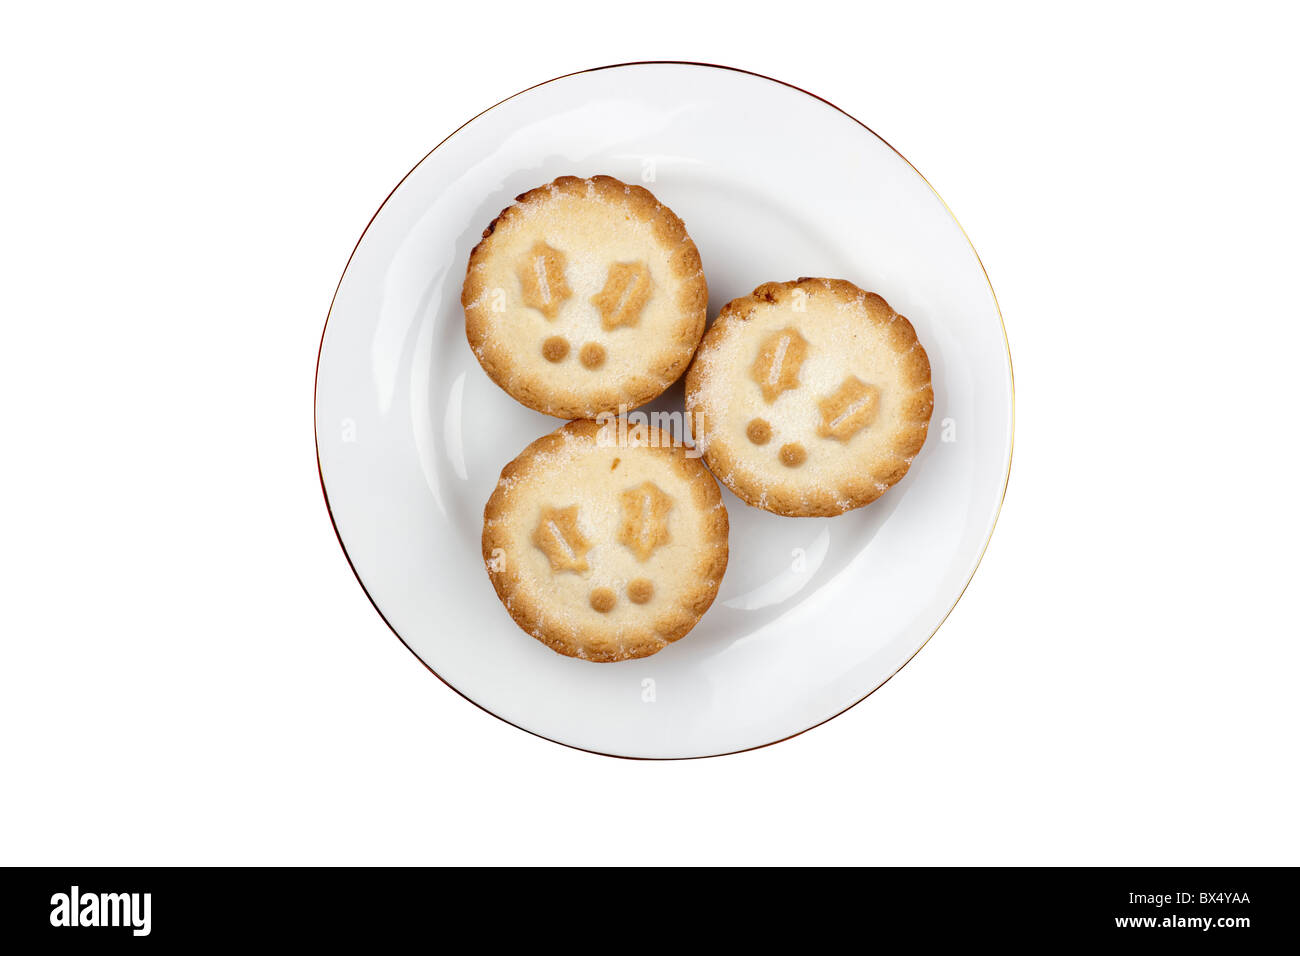 Three mince pies on a white plate Stock Photo